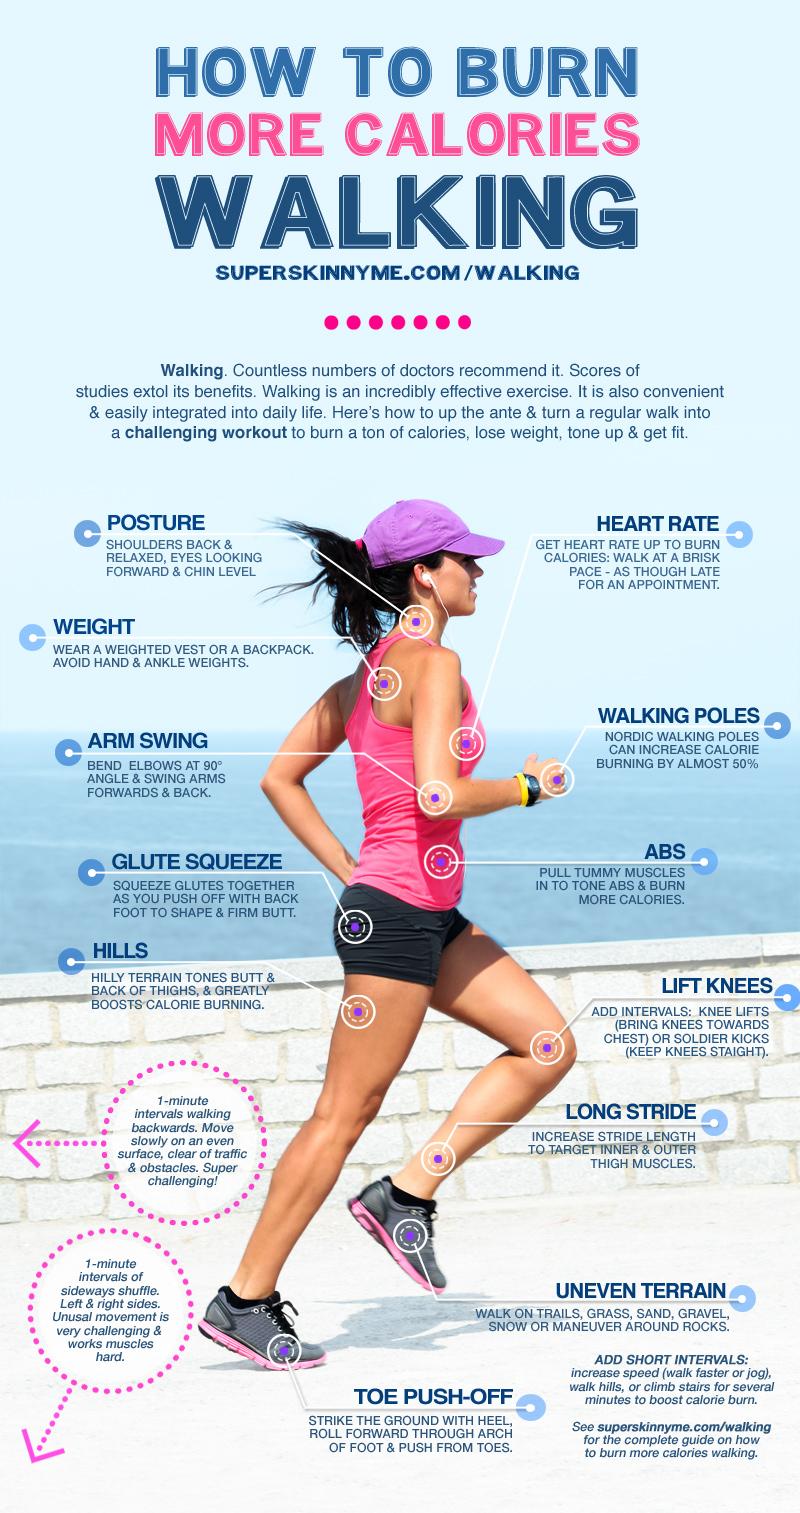 How to best burn calories while walking 